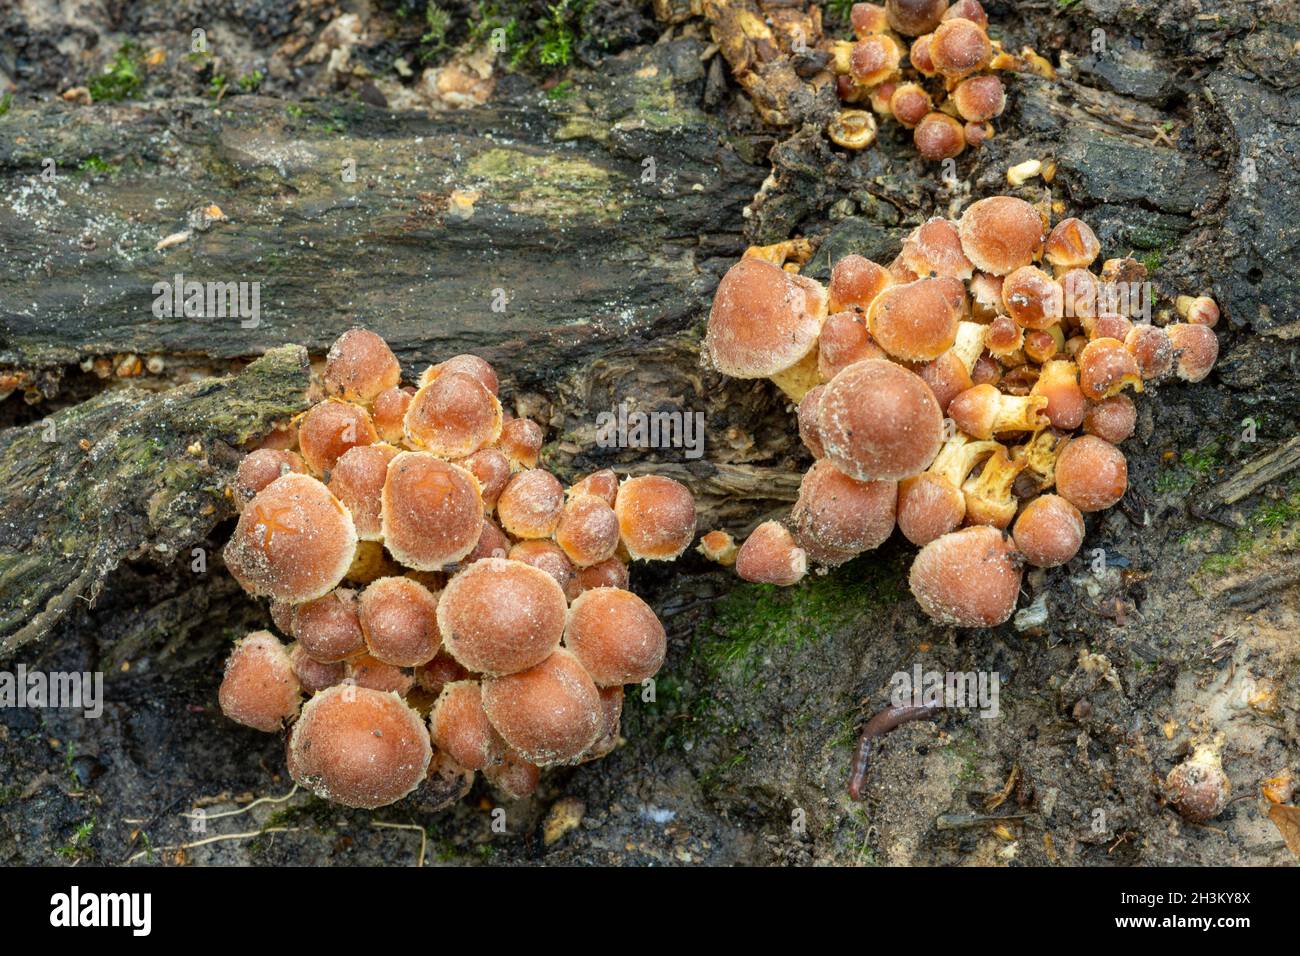 Sulphur tuft fungi (Hypholoma fasciculare) or toadstools growing at the bottom of a mature tree trunk in broadleaf woodland during autumn, England, UK Stock Photo